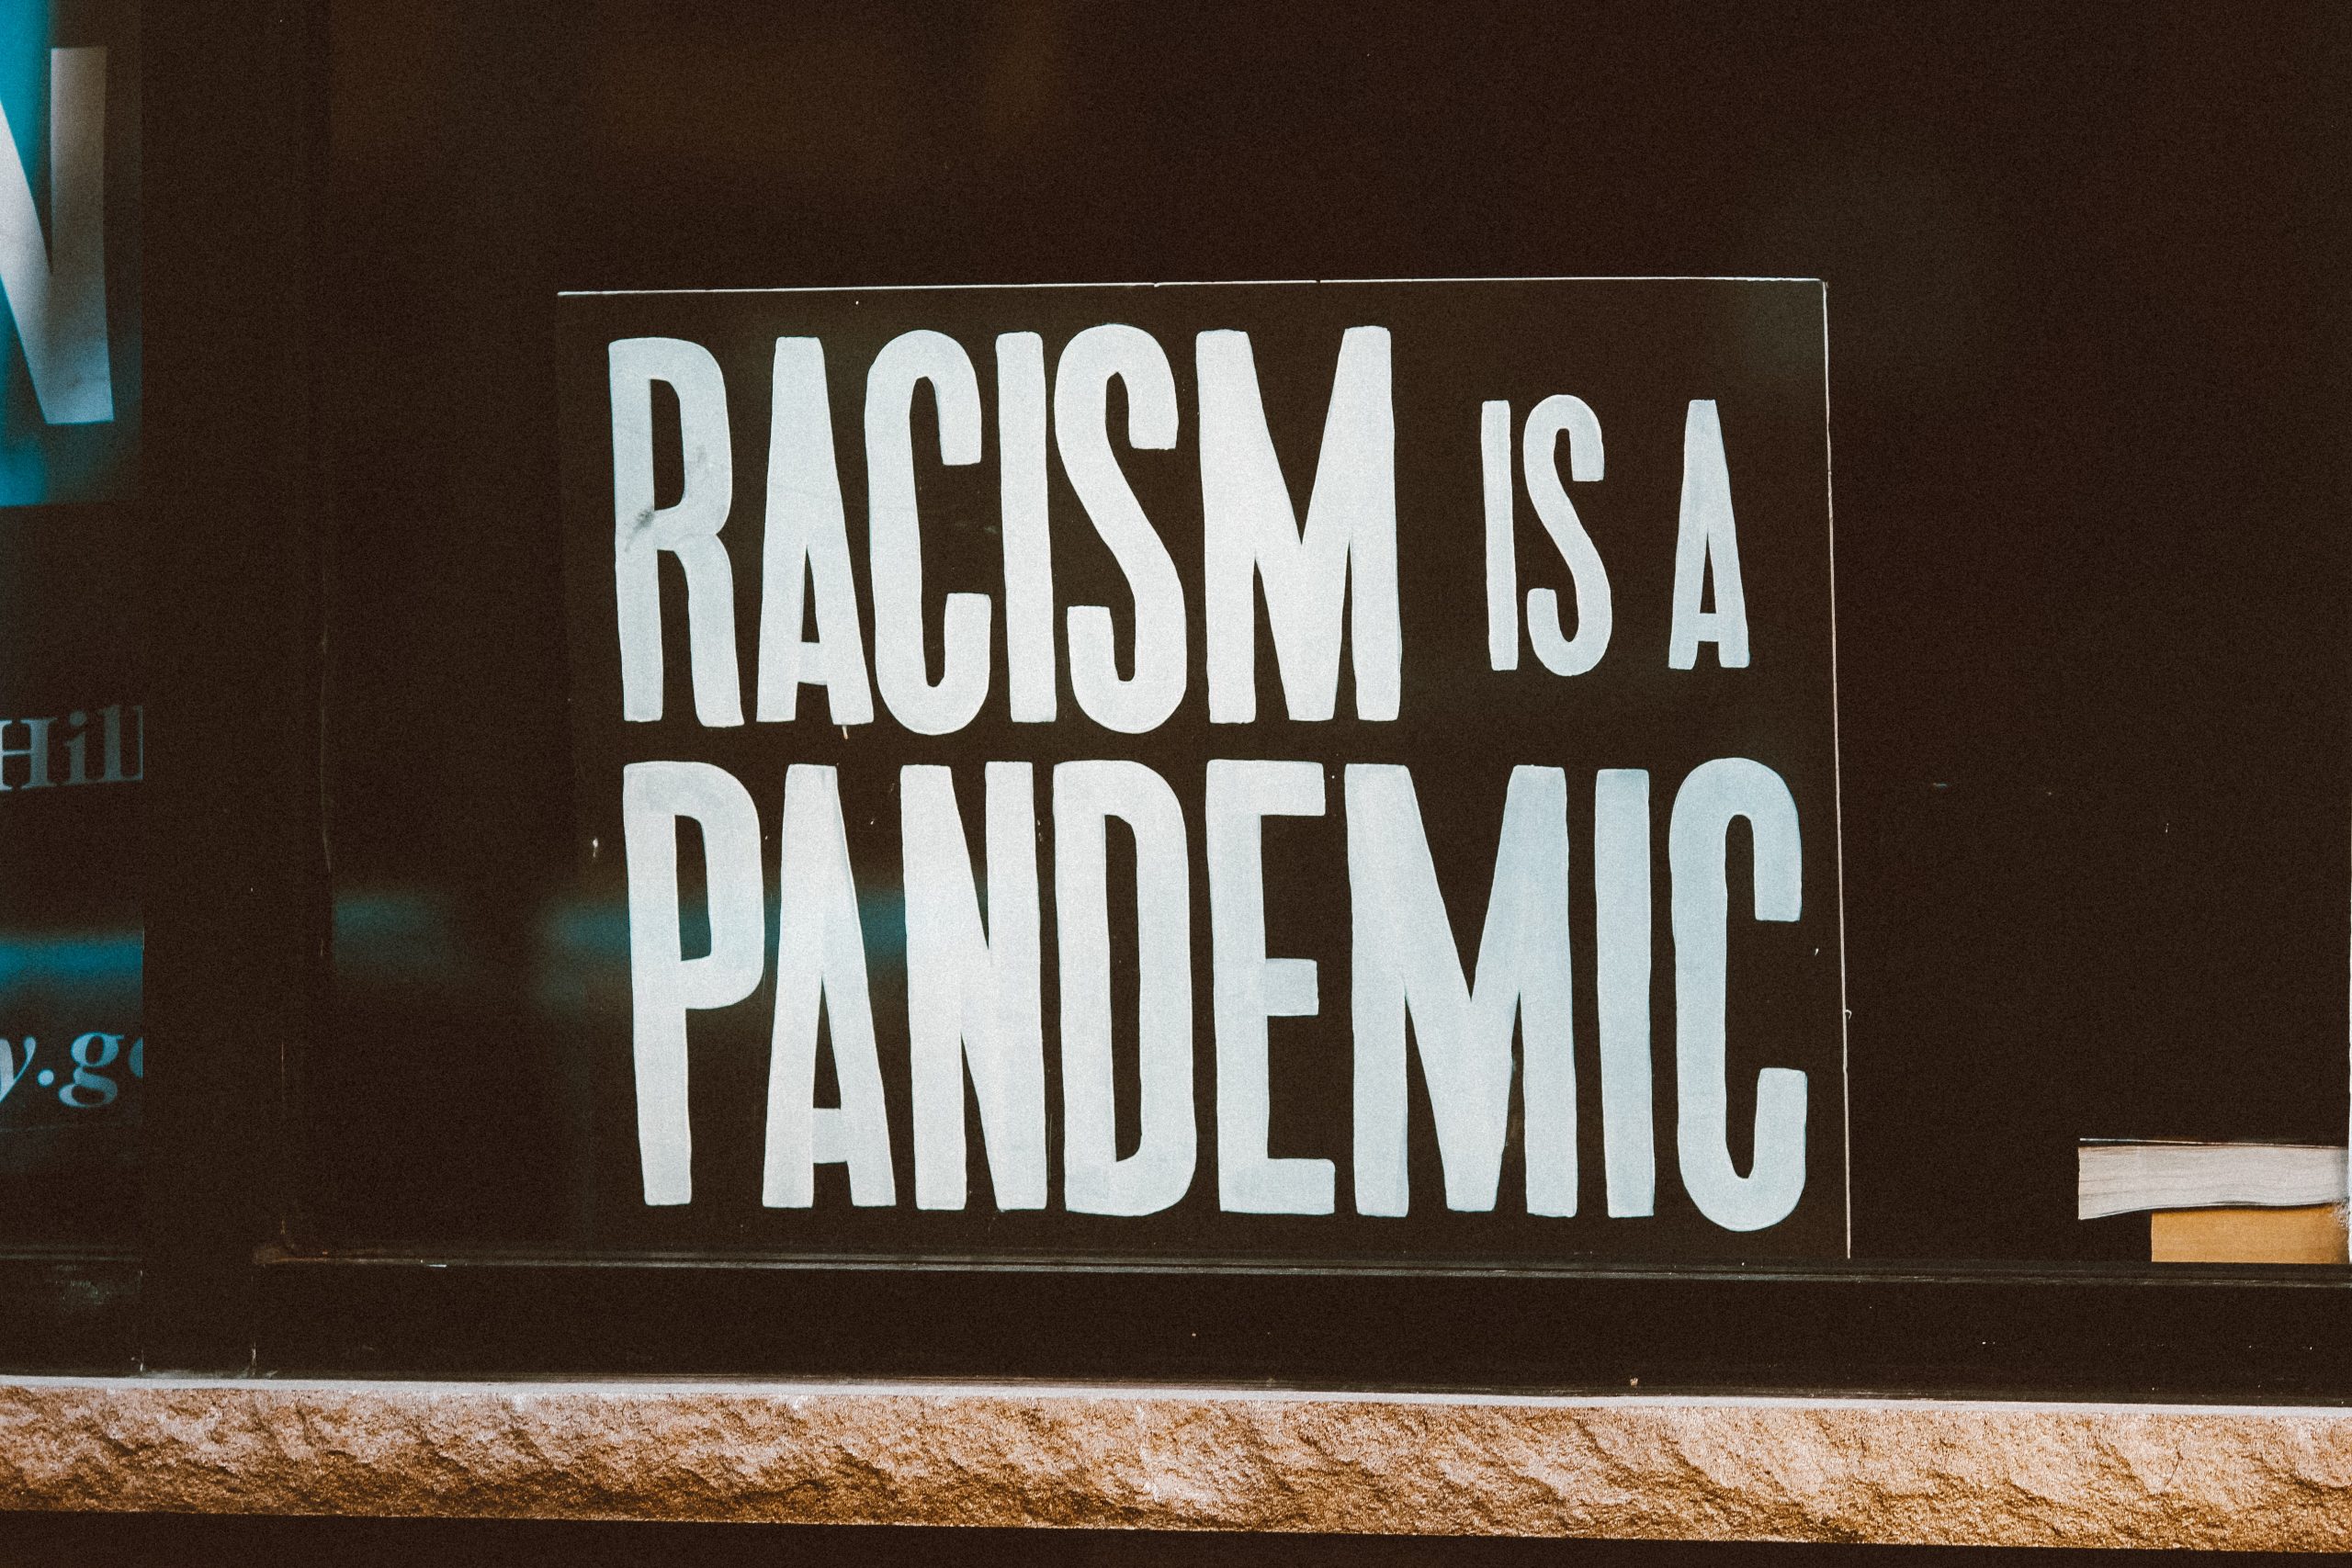 A sign reads "racism is a pandemic" in white lettering against a black background